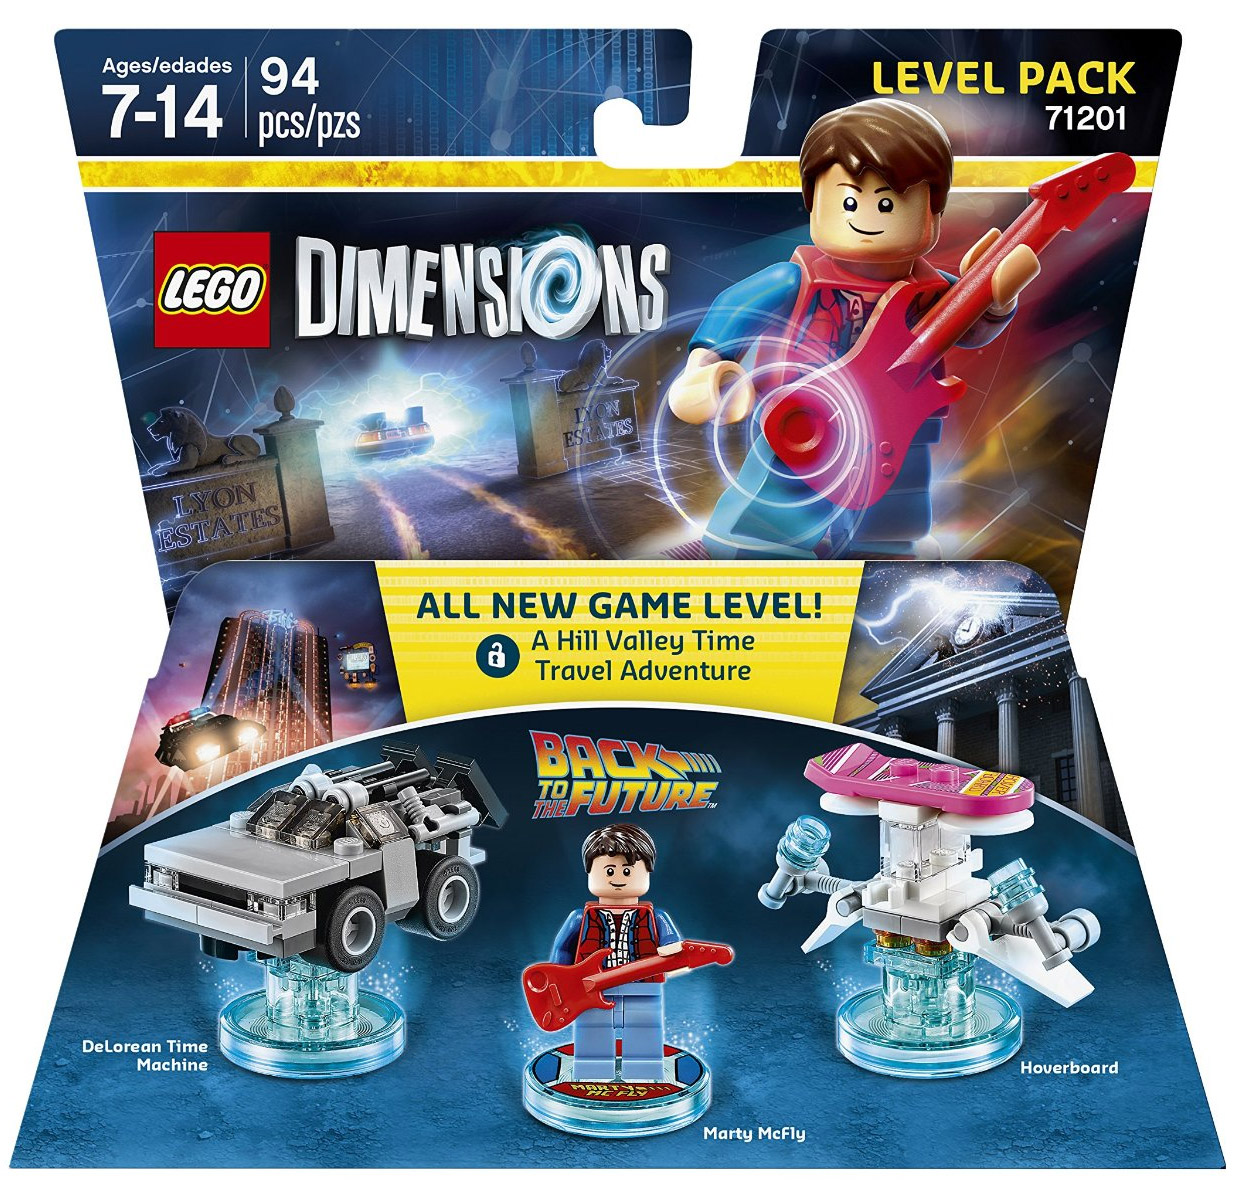 LEGO Dimensions Back to the Future Level Pack Revealed! - Bricks and Bloks